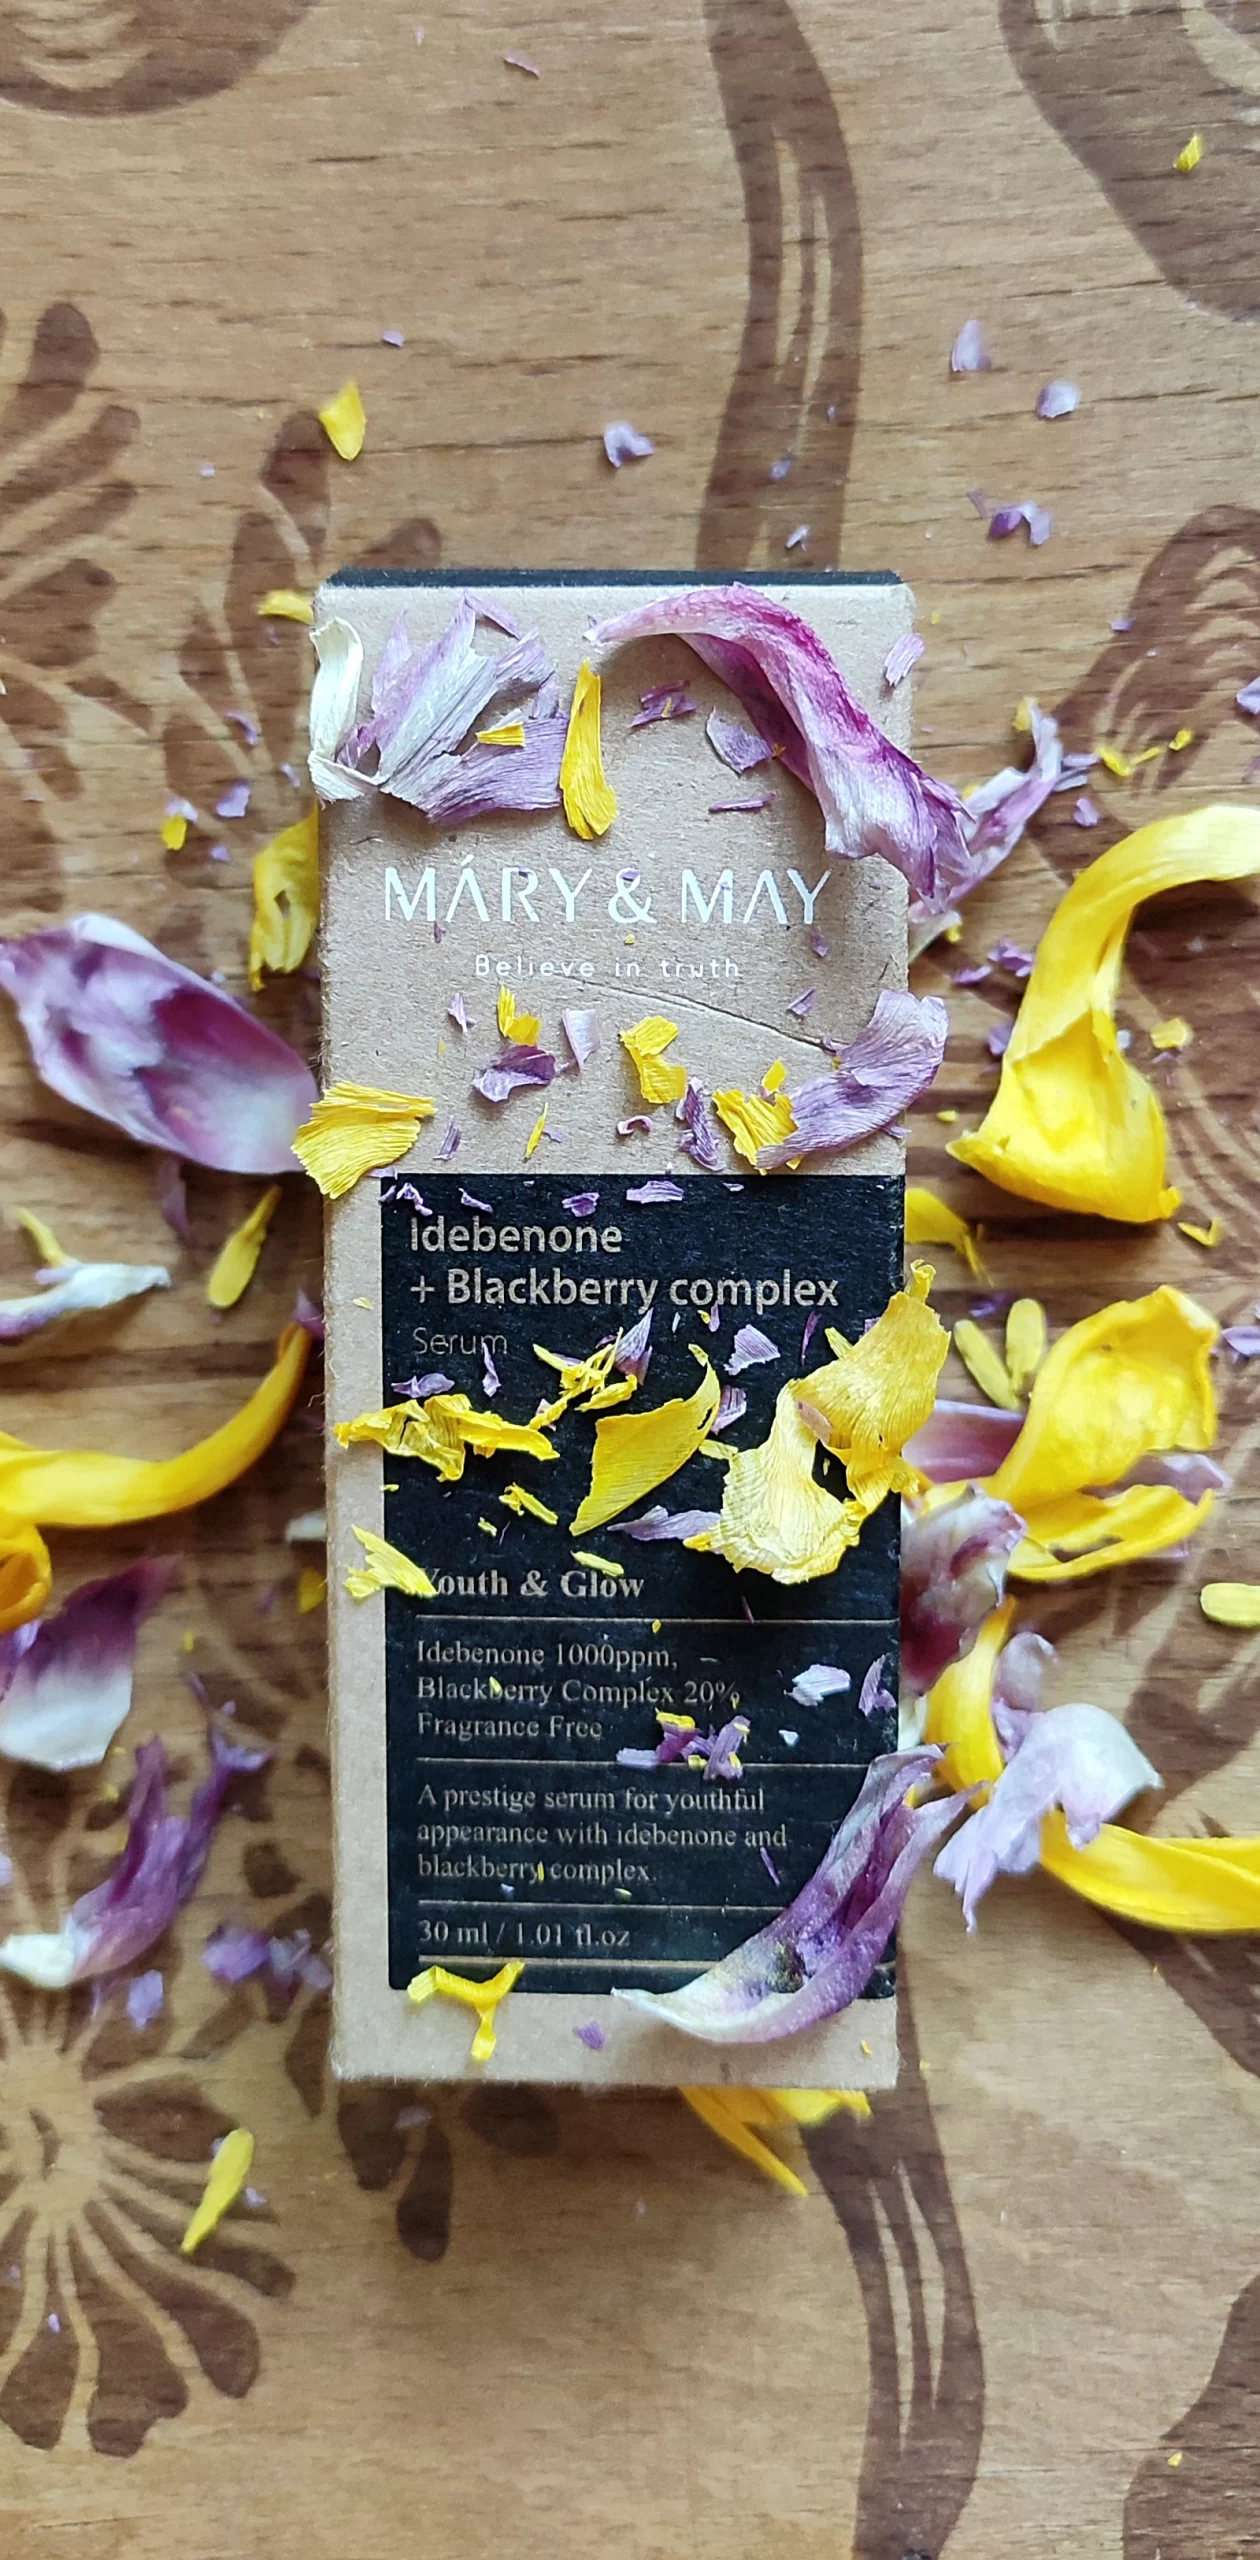 MARY & MAY Idebenone + Blackberry Complex Serum Review